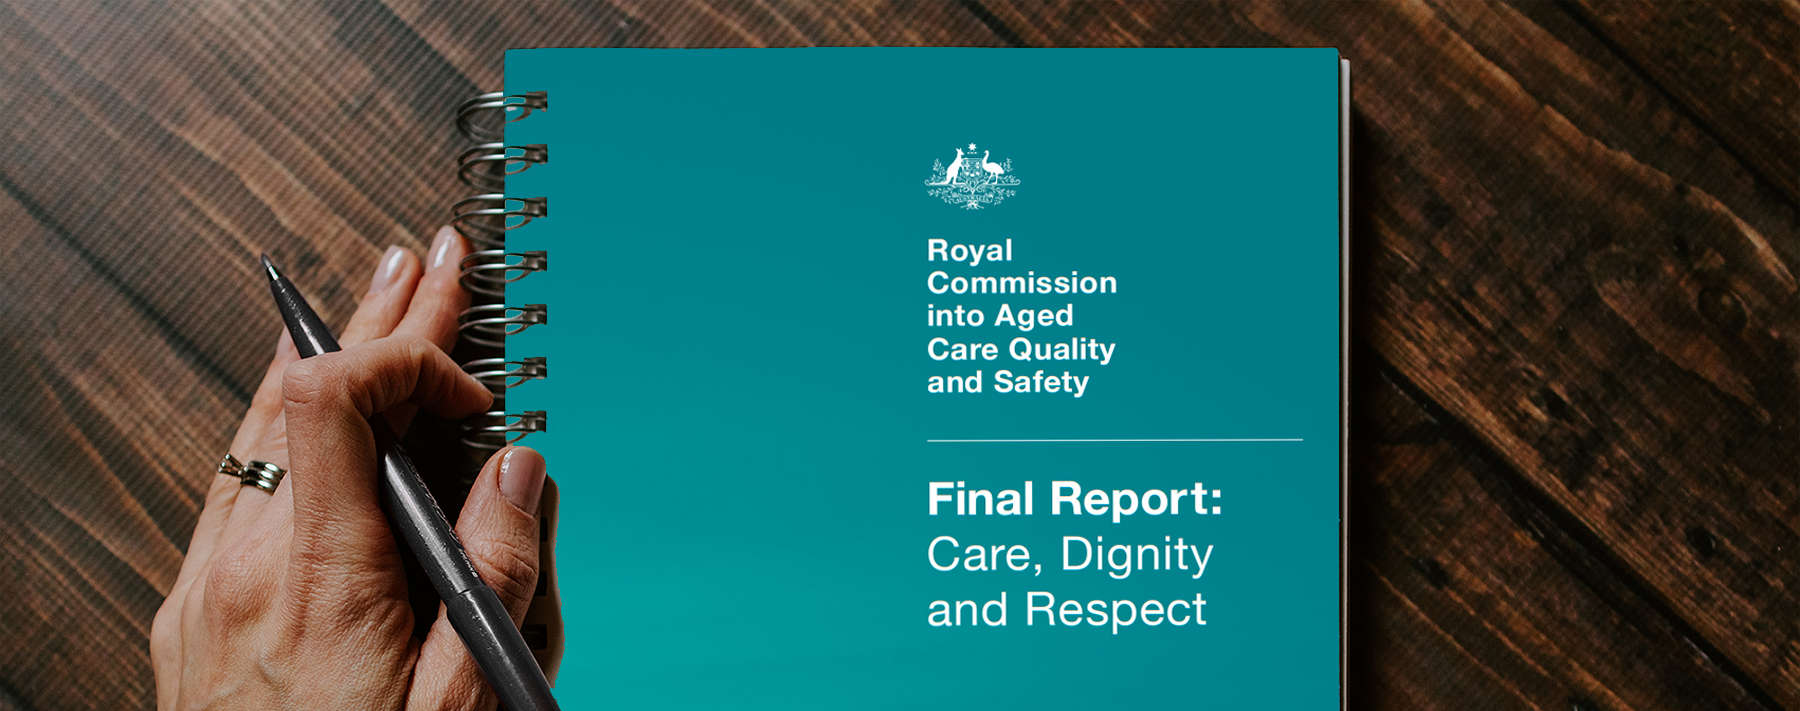 Royal Commission Series: dementia and palliative care